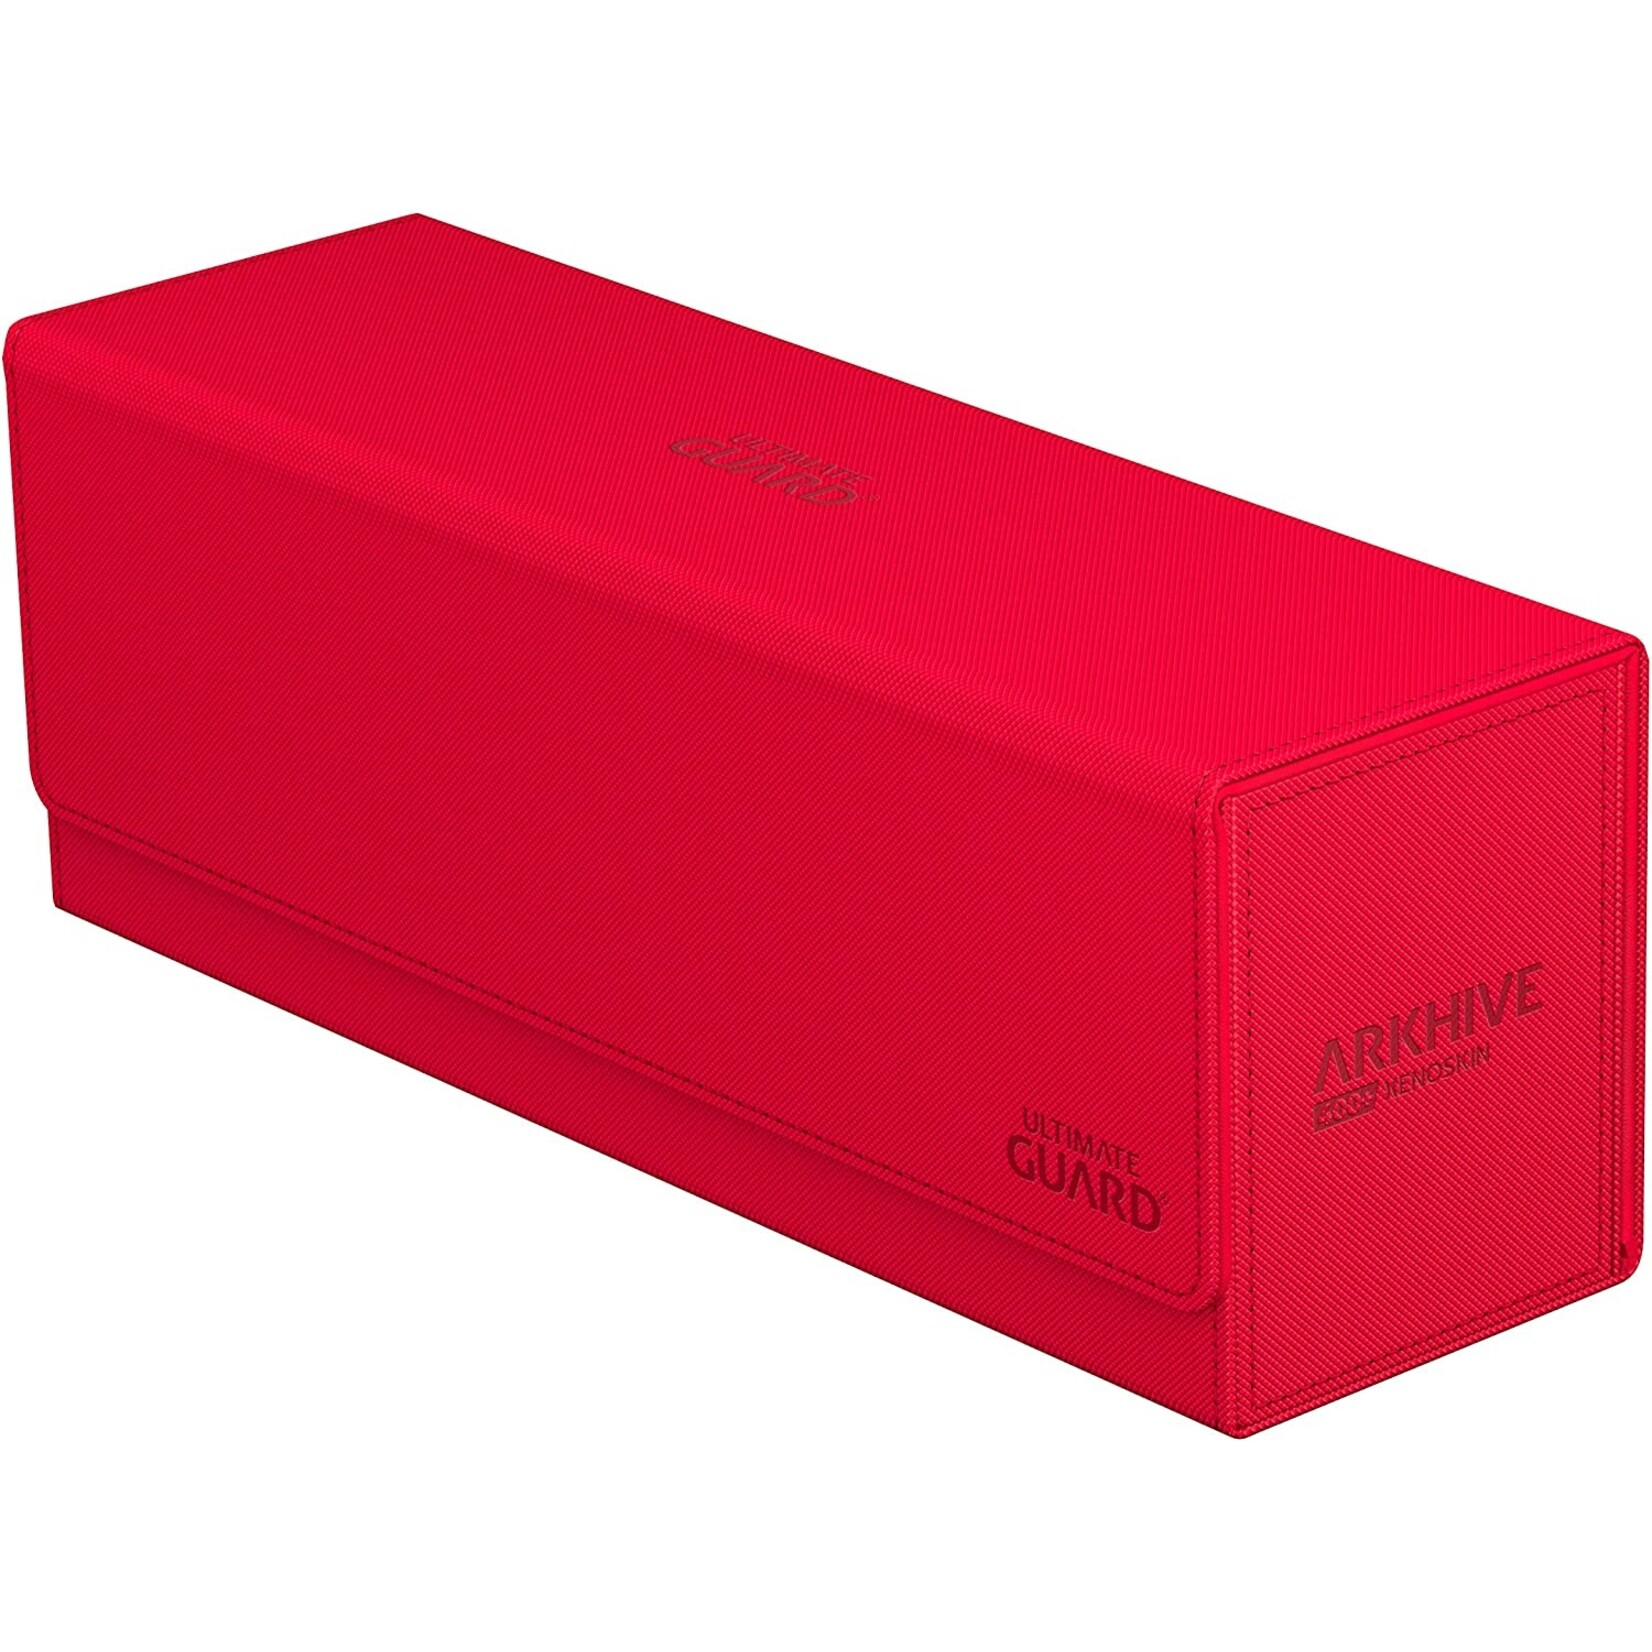 Ultimate Guard Ultimate Guard, Arkhive xenoskin 400+ Red